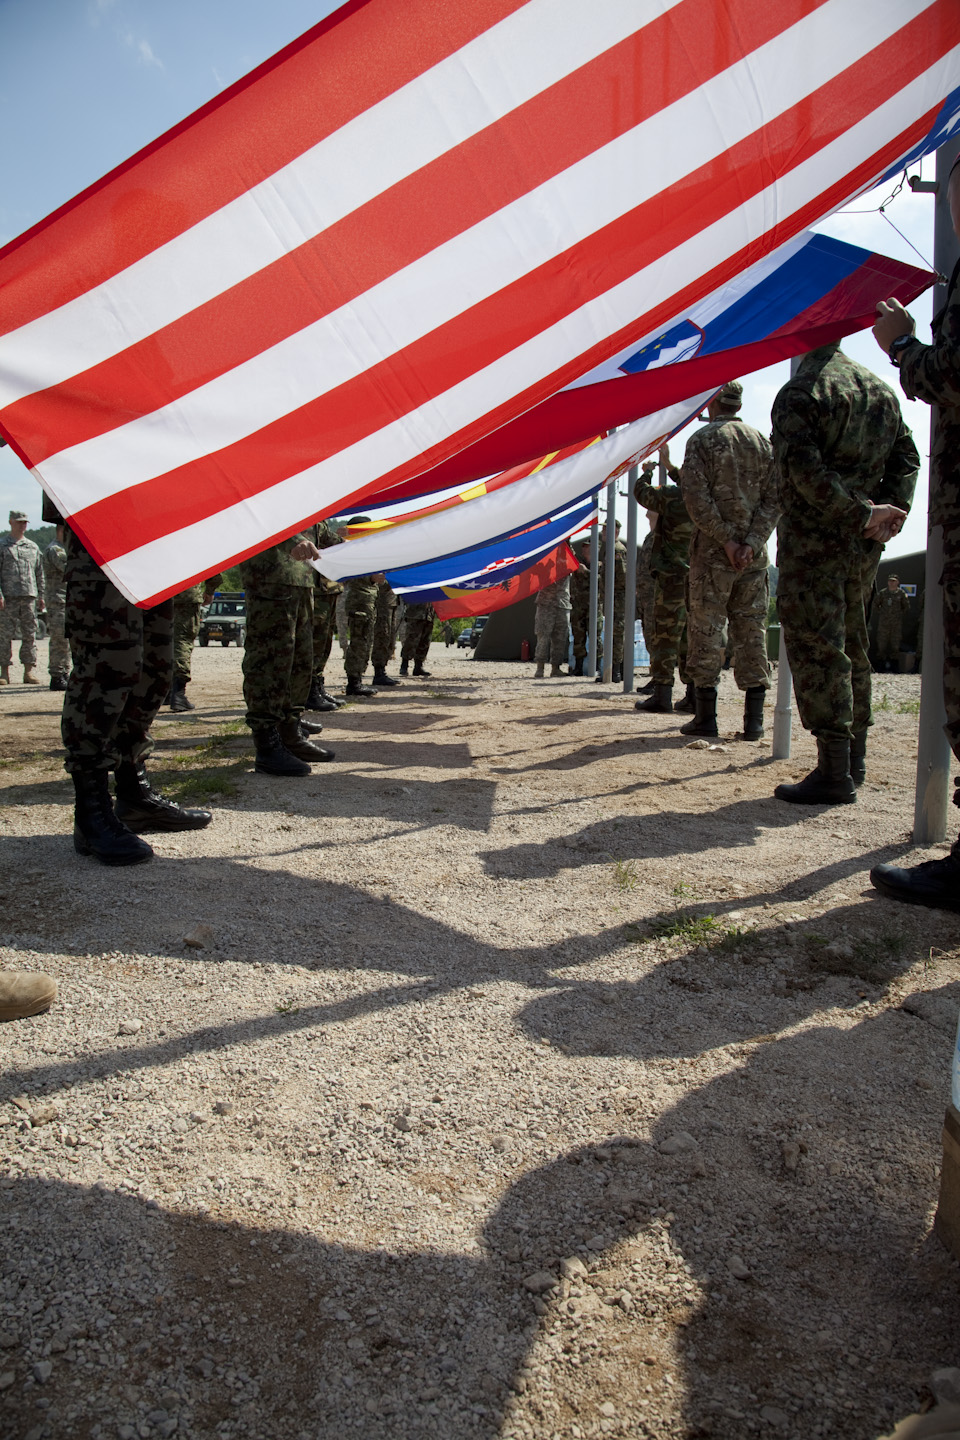 many people in the military uniform holding american flags